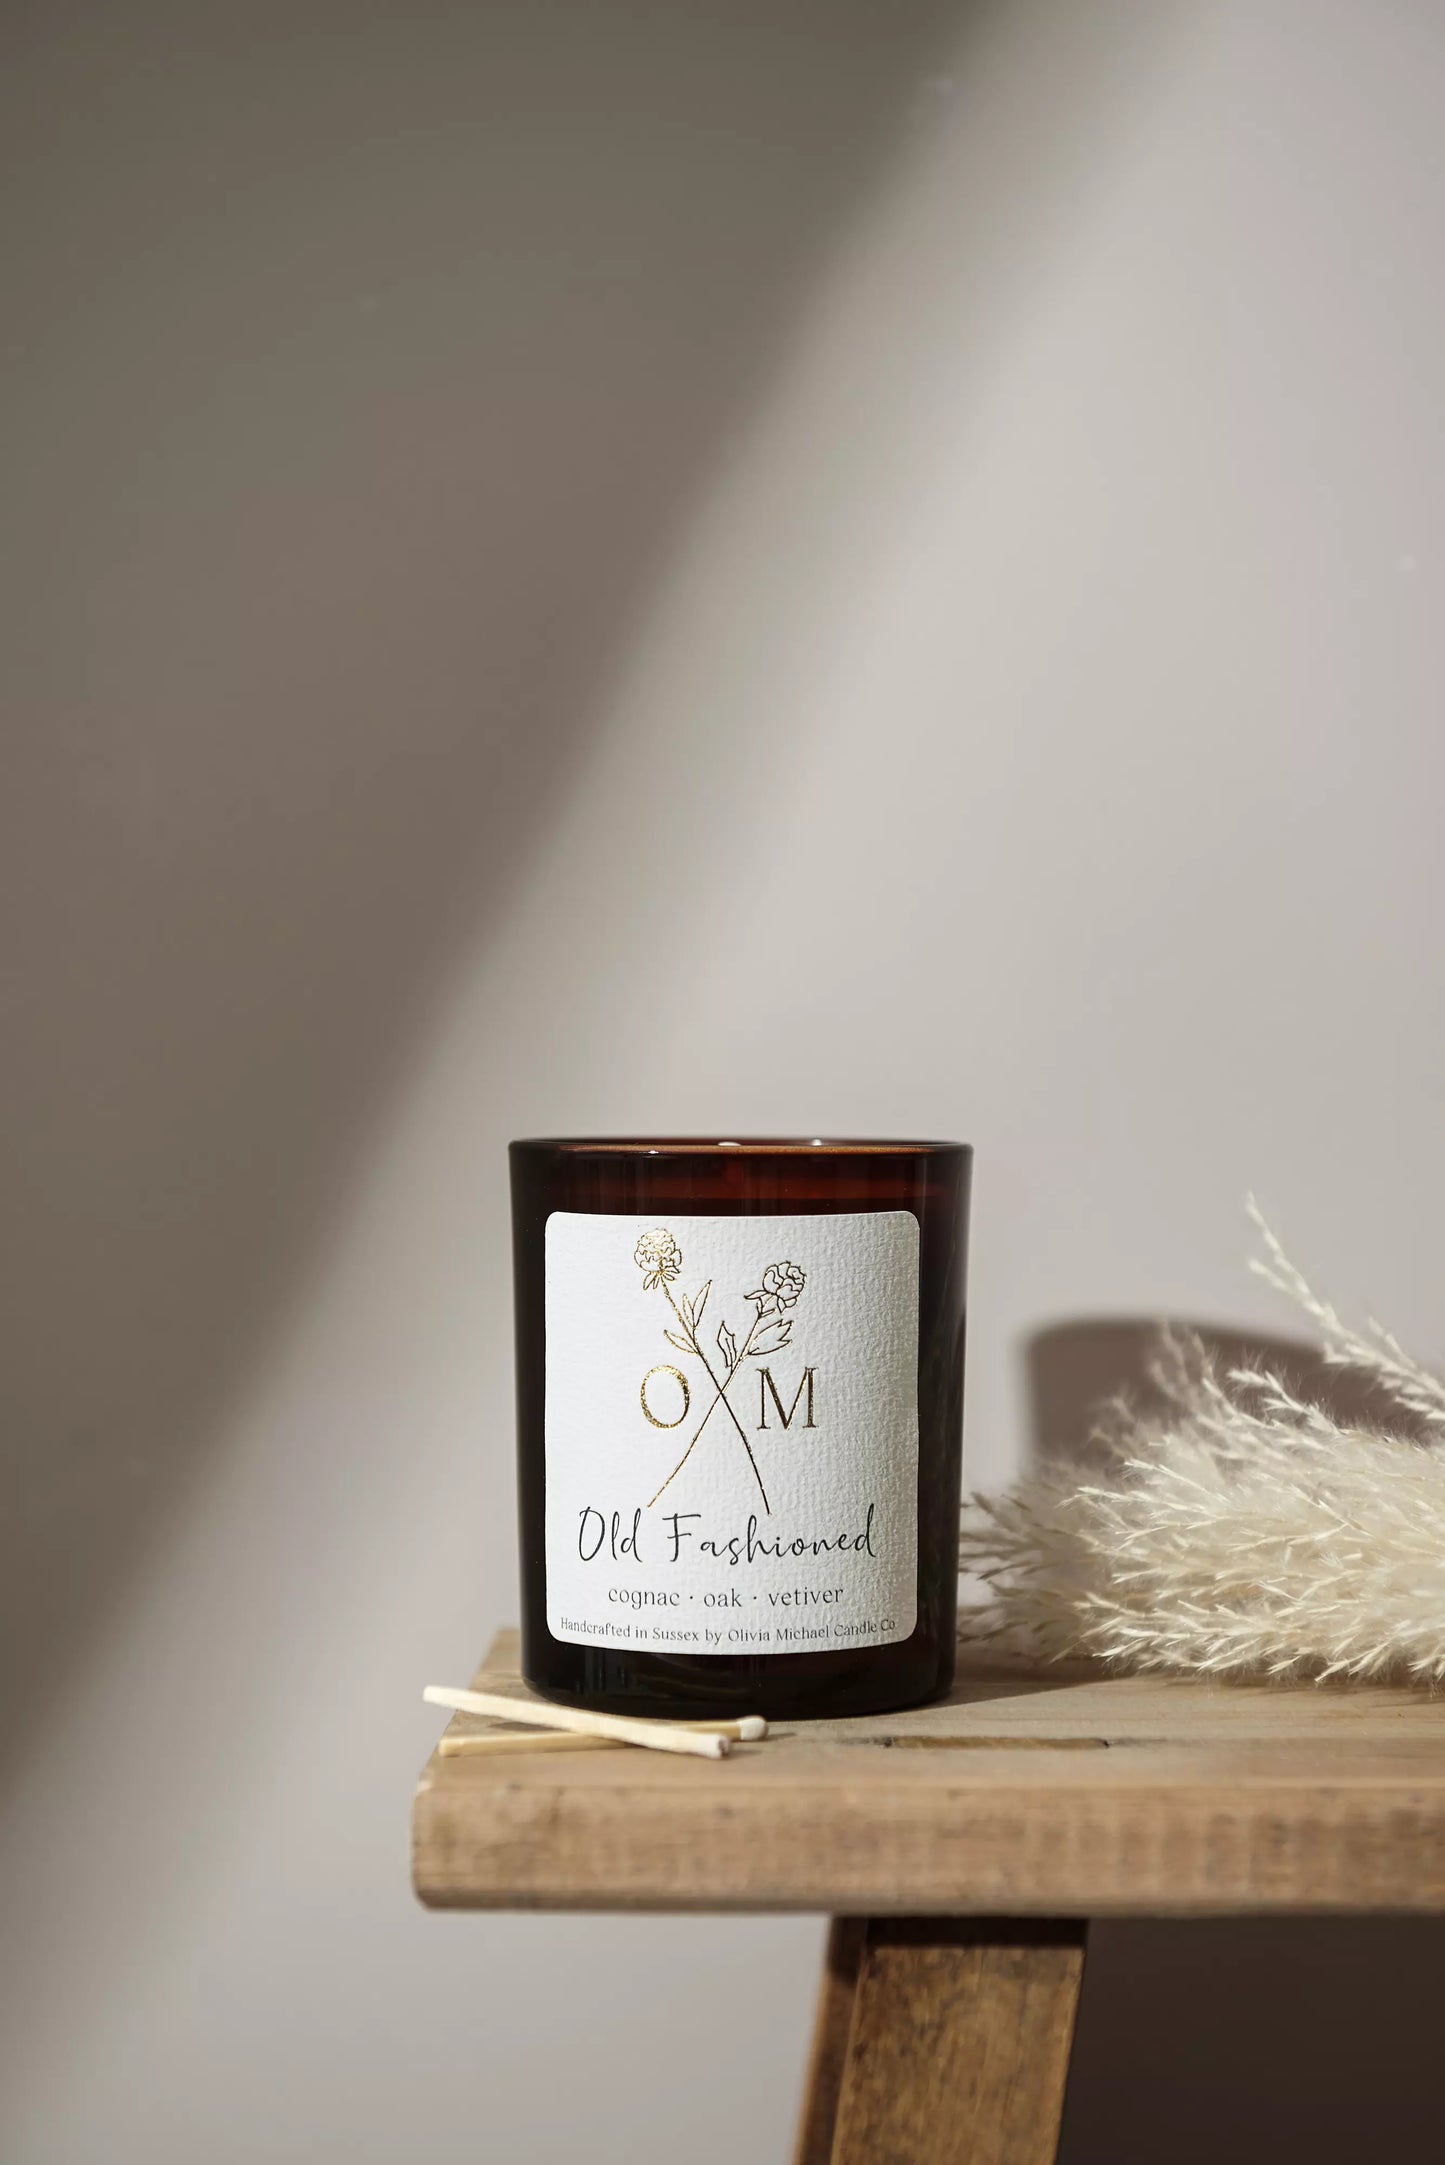 Our oak and vetiver scented candle is on display in an amber glass jar.